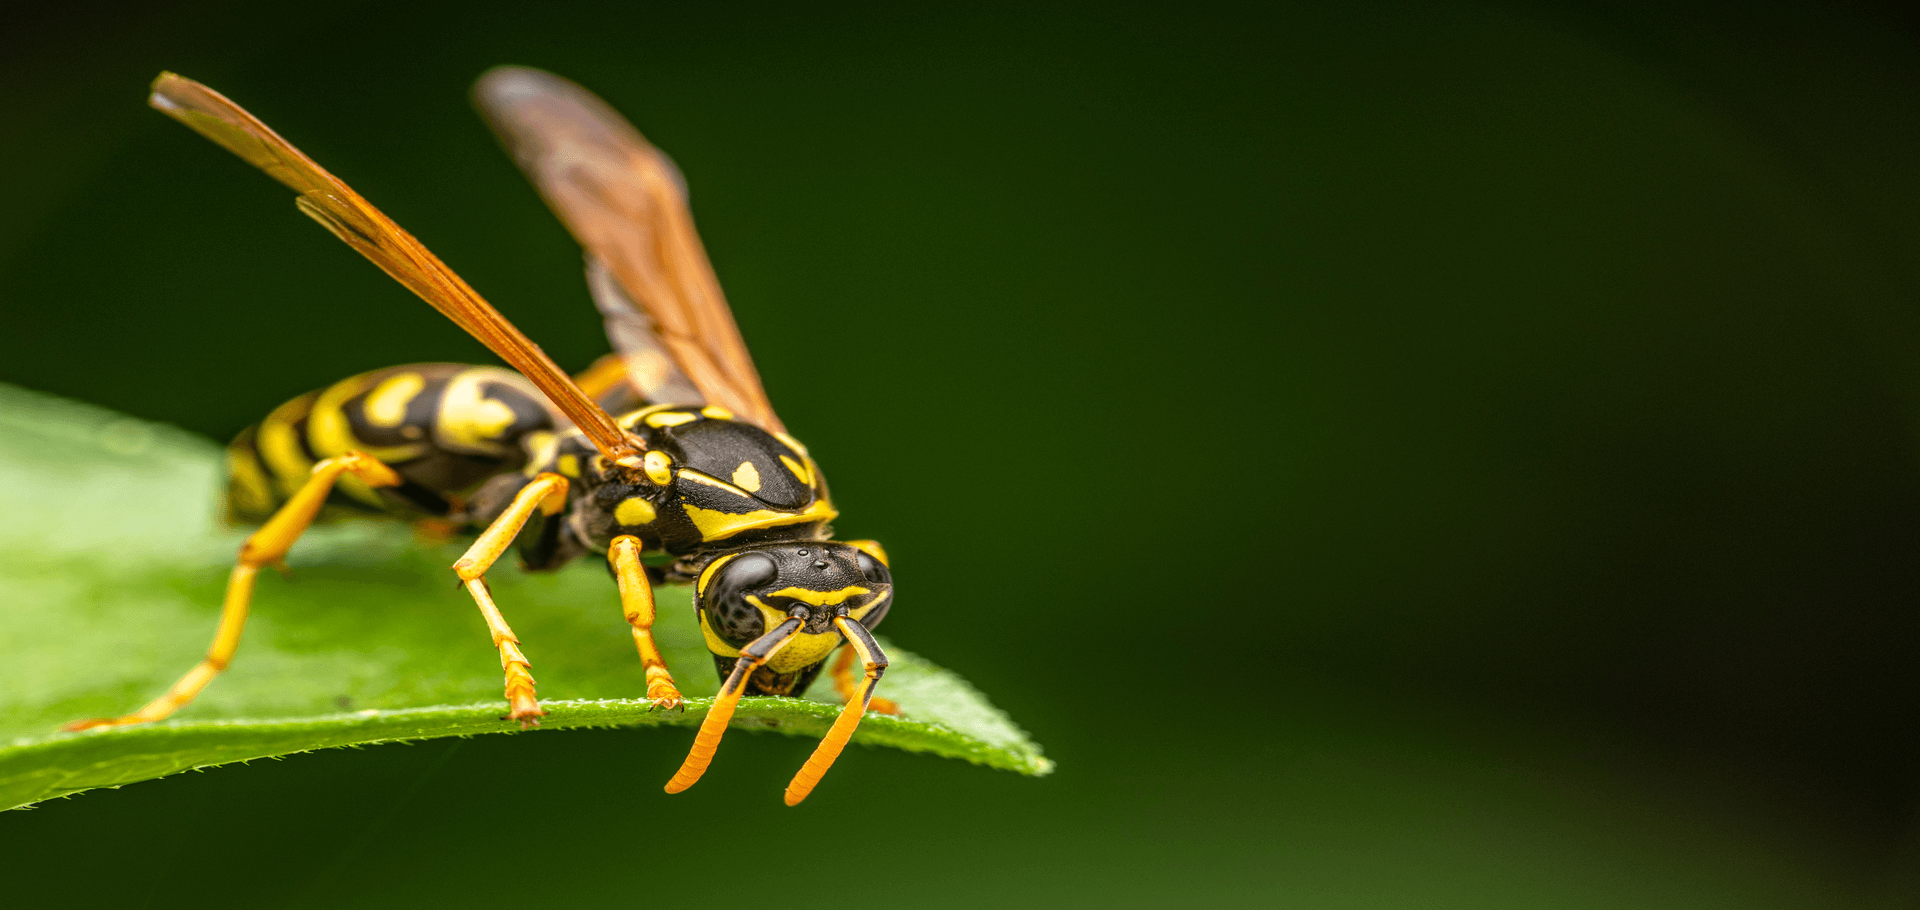 How to keep wasps from invading your garden